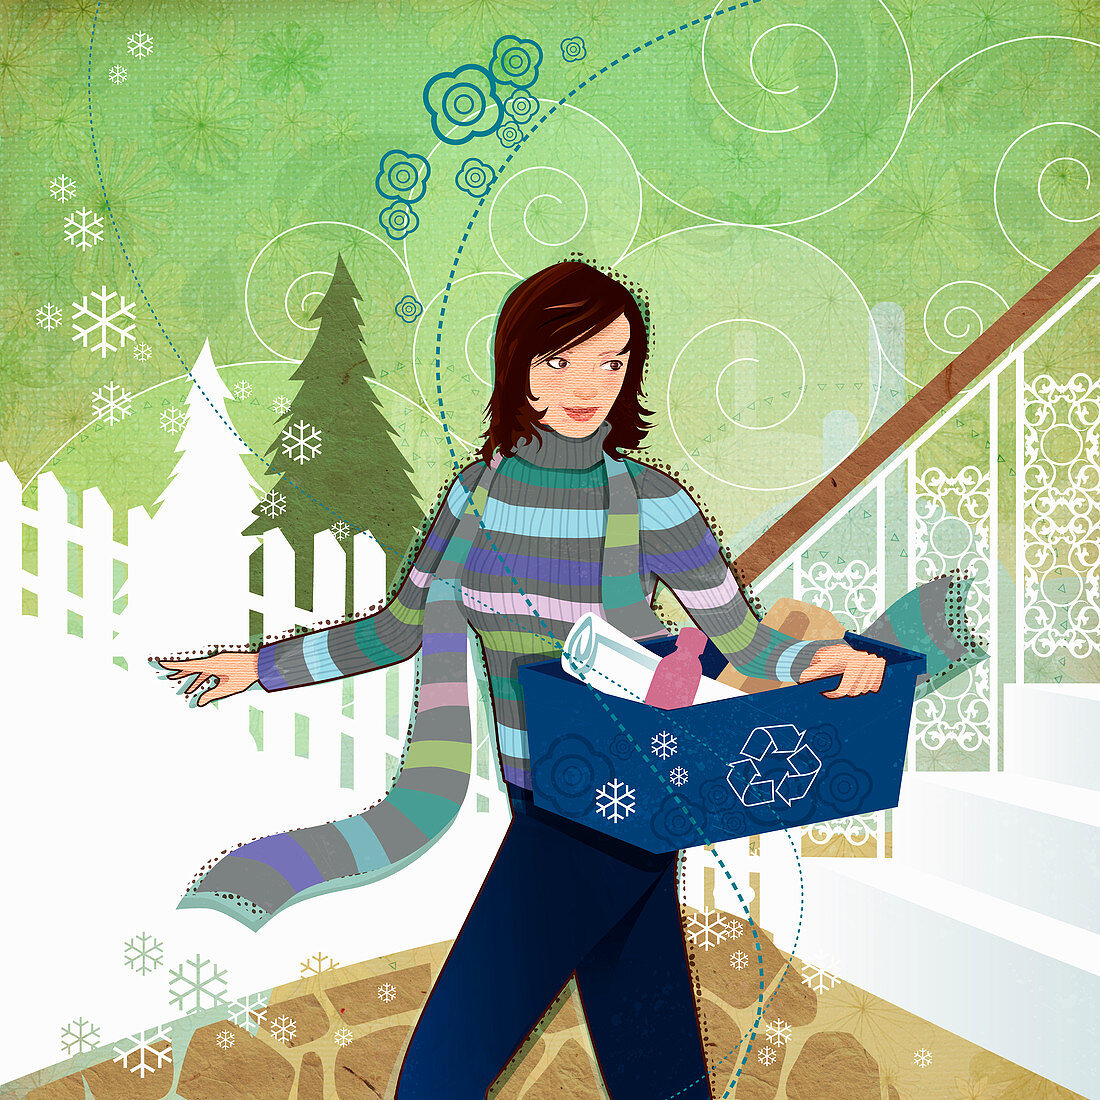 Woman carrying recycling bin in winter, illustration